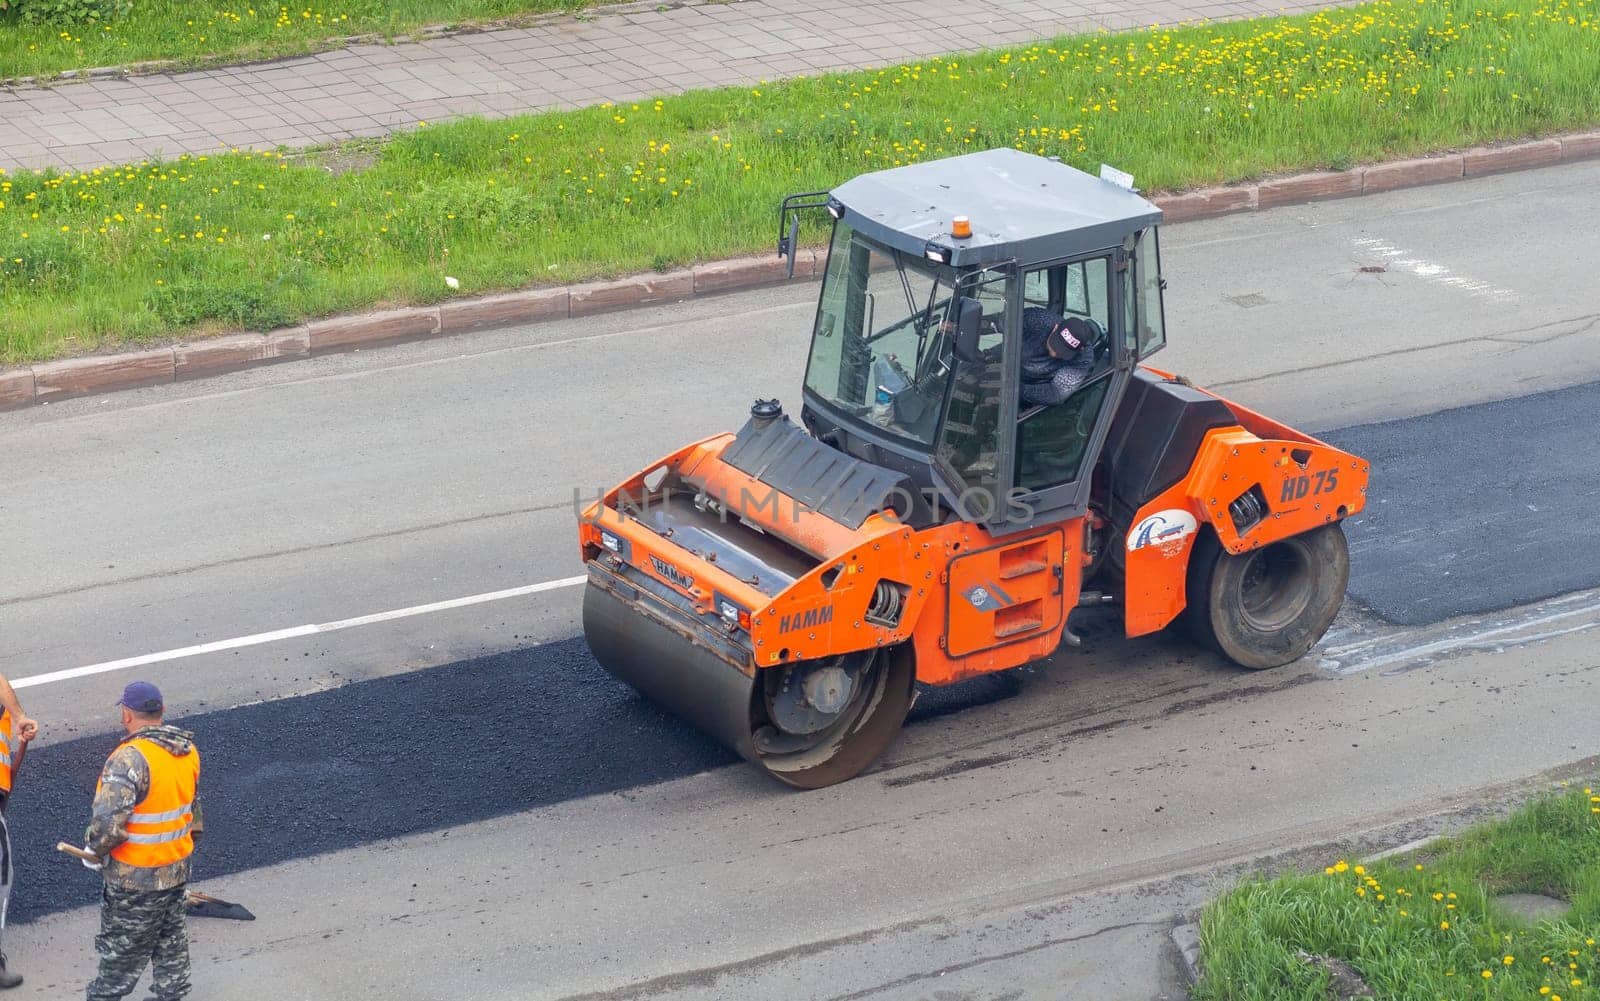 Road works on asphalt laying. Workers in vests are laying patches by AnatoliiFoto